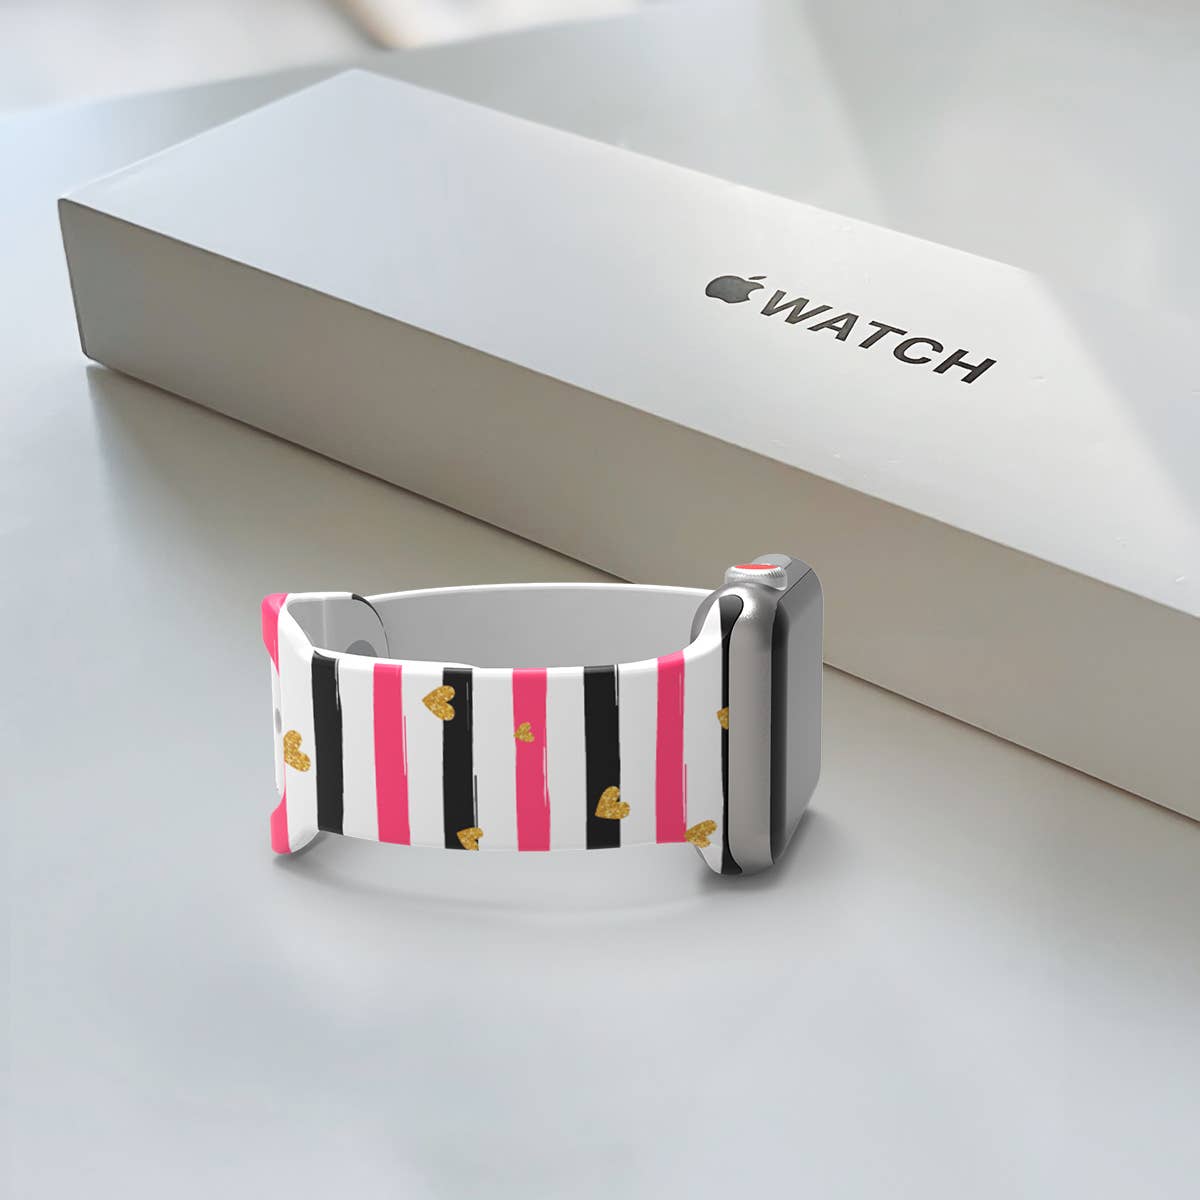 ShopTrendsNow - Valentine's Day Apple Watch Bands Hearts Love Kisses: 38/40/41mm / Striped Hearts